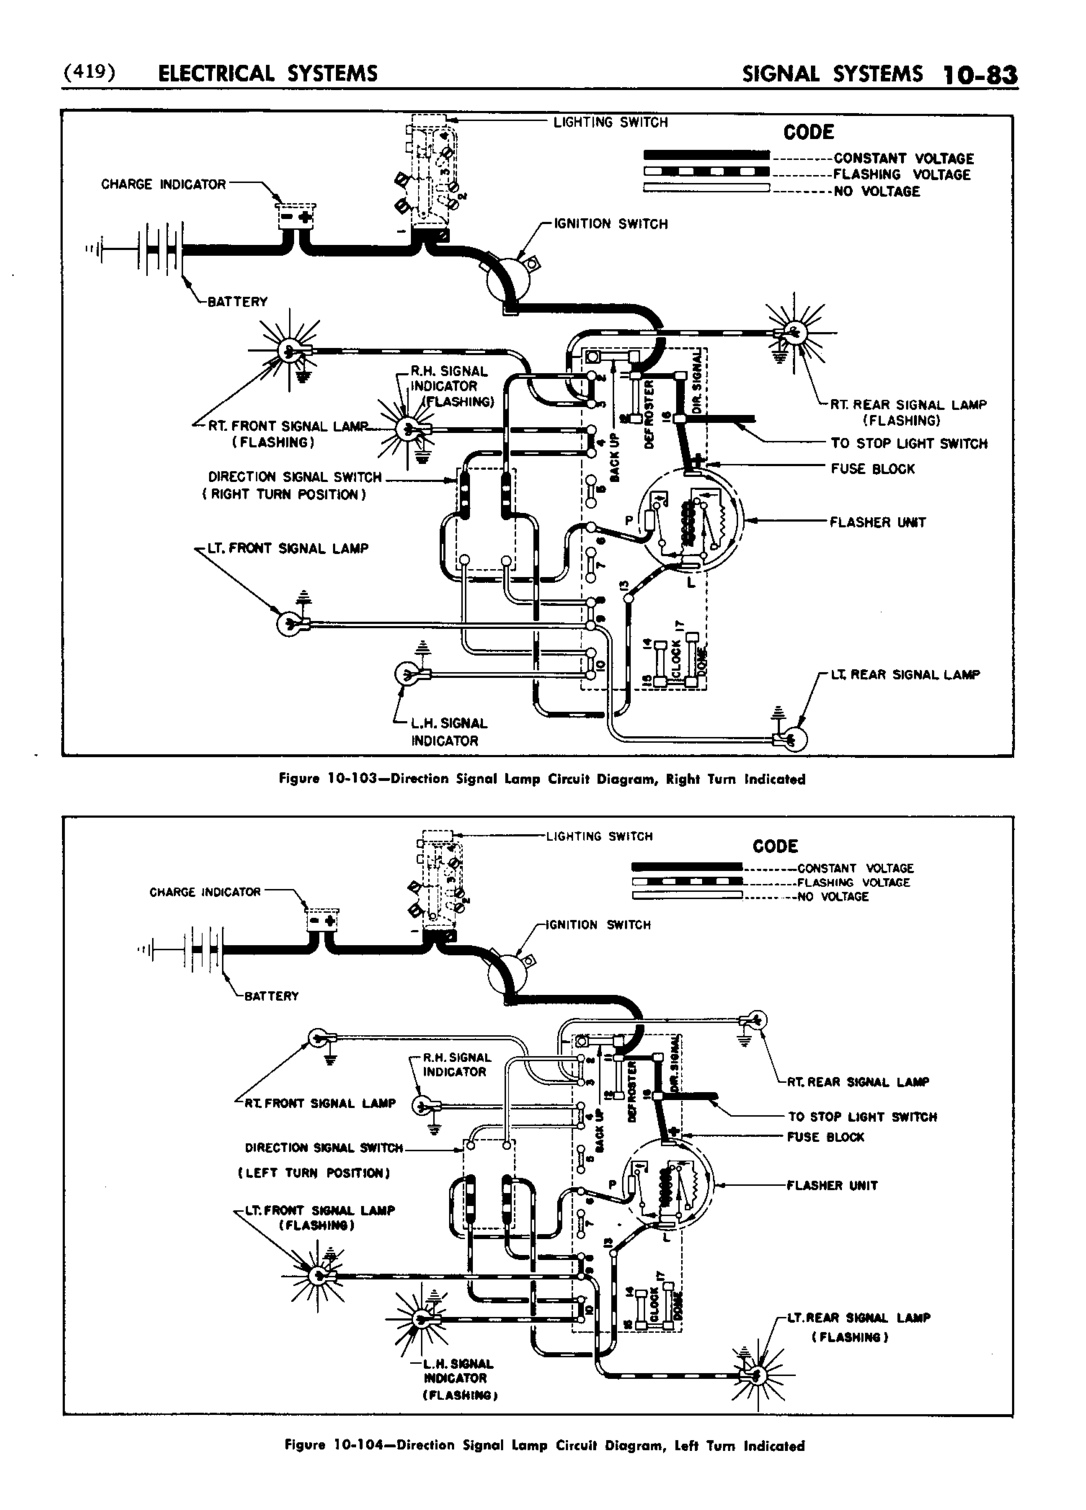 n_11 1952 Buick Shop Manual - Electrical Systems-083-083.jpg